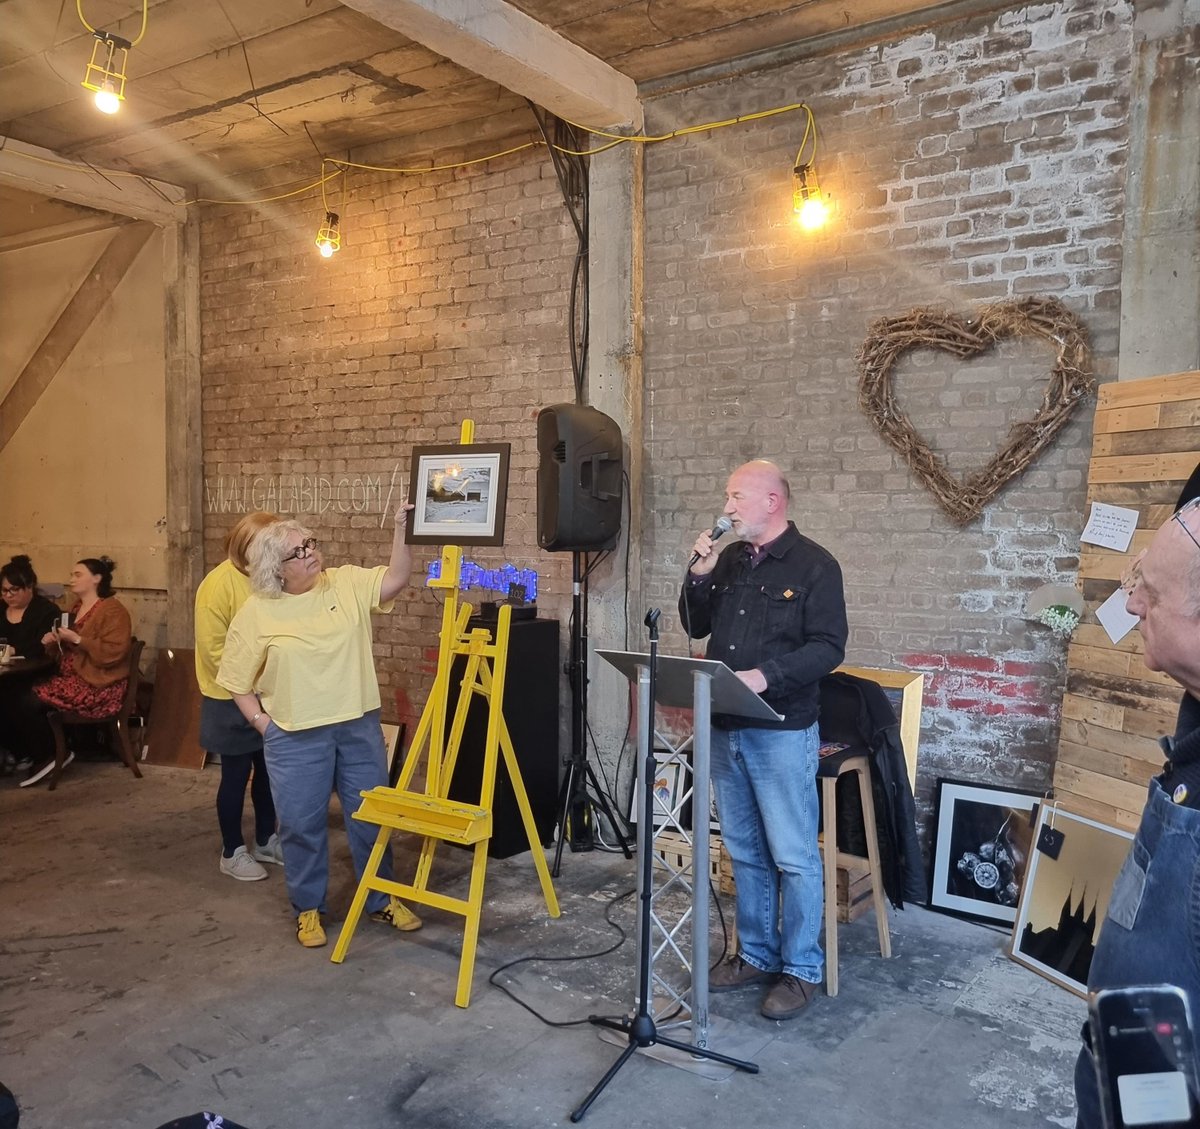 DES are delighted to have partnered with #HIVE artists in their incredible art auction, which raised funds for Ukrainian disaster relief organisations. The total raised exceeds £8,000 - an incredible accomplishment! #community #art #team #charity